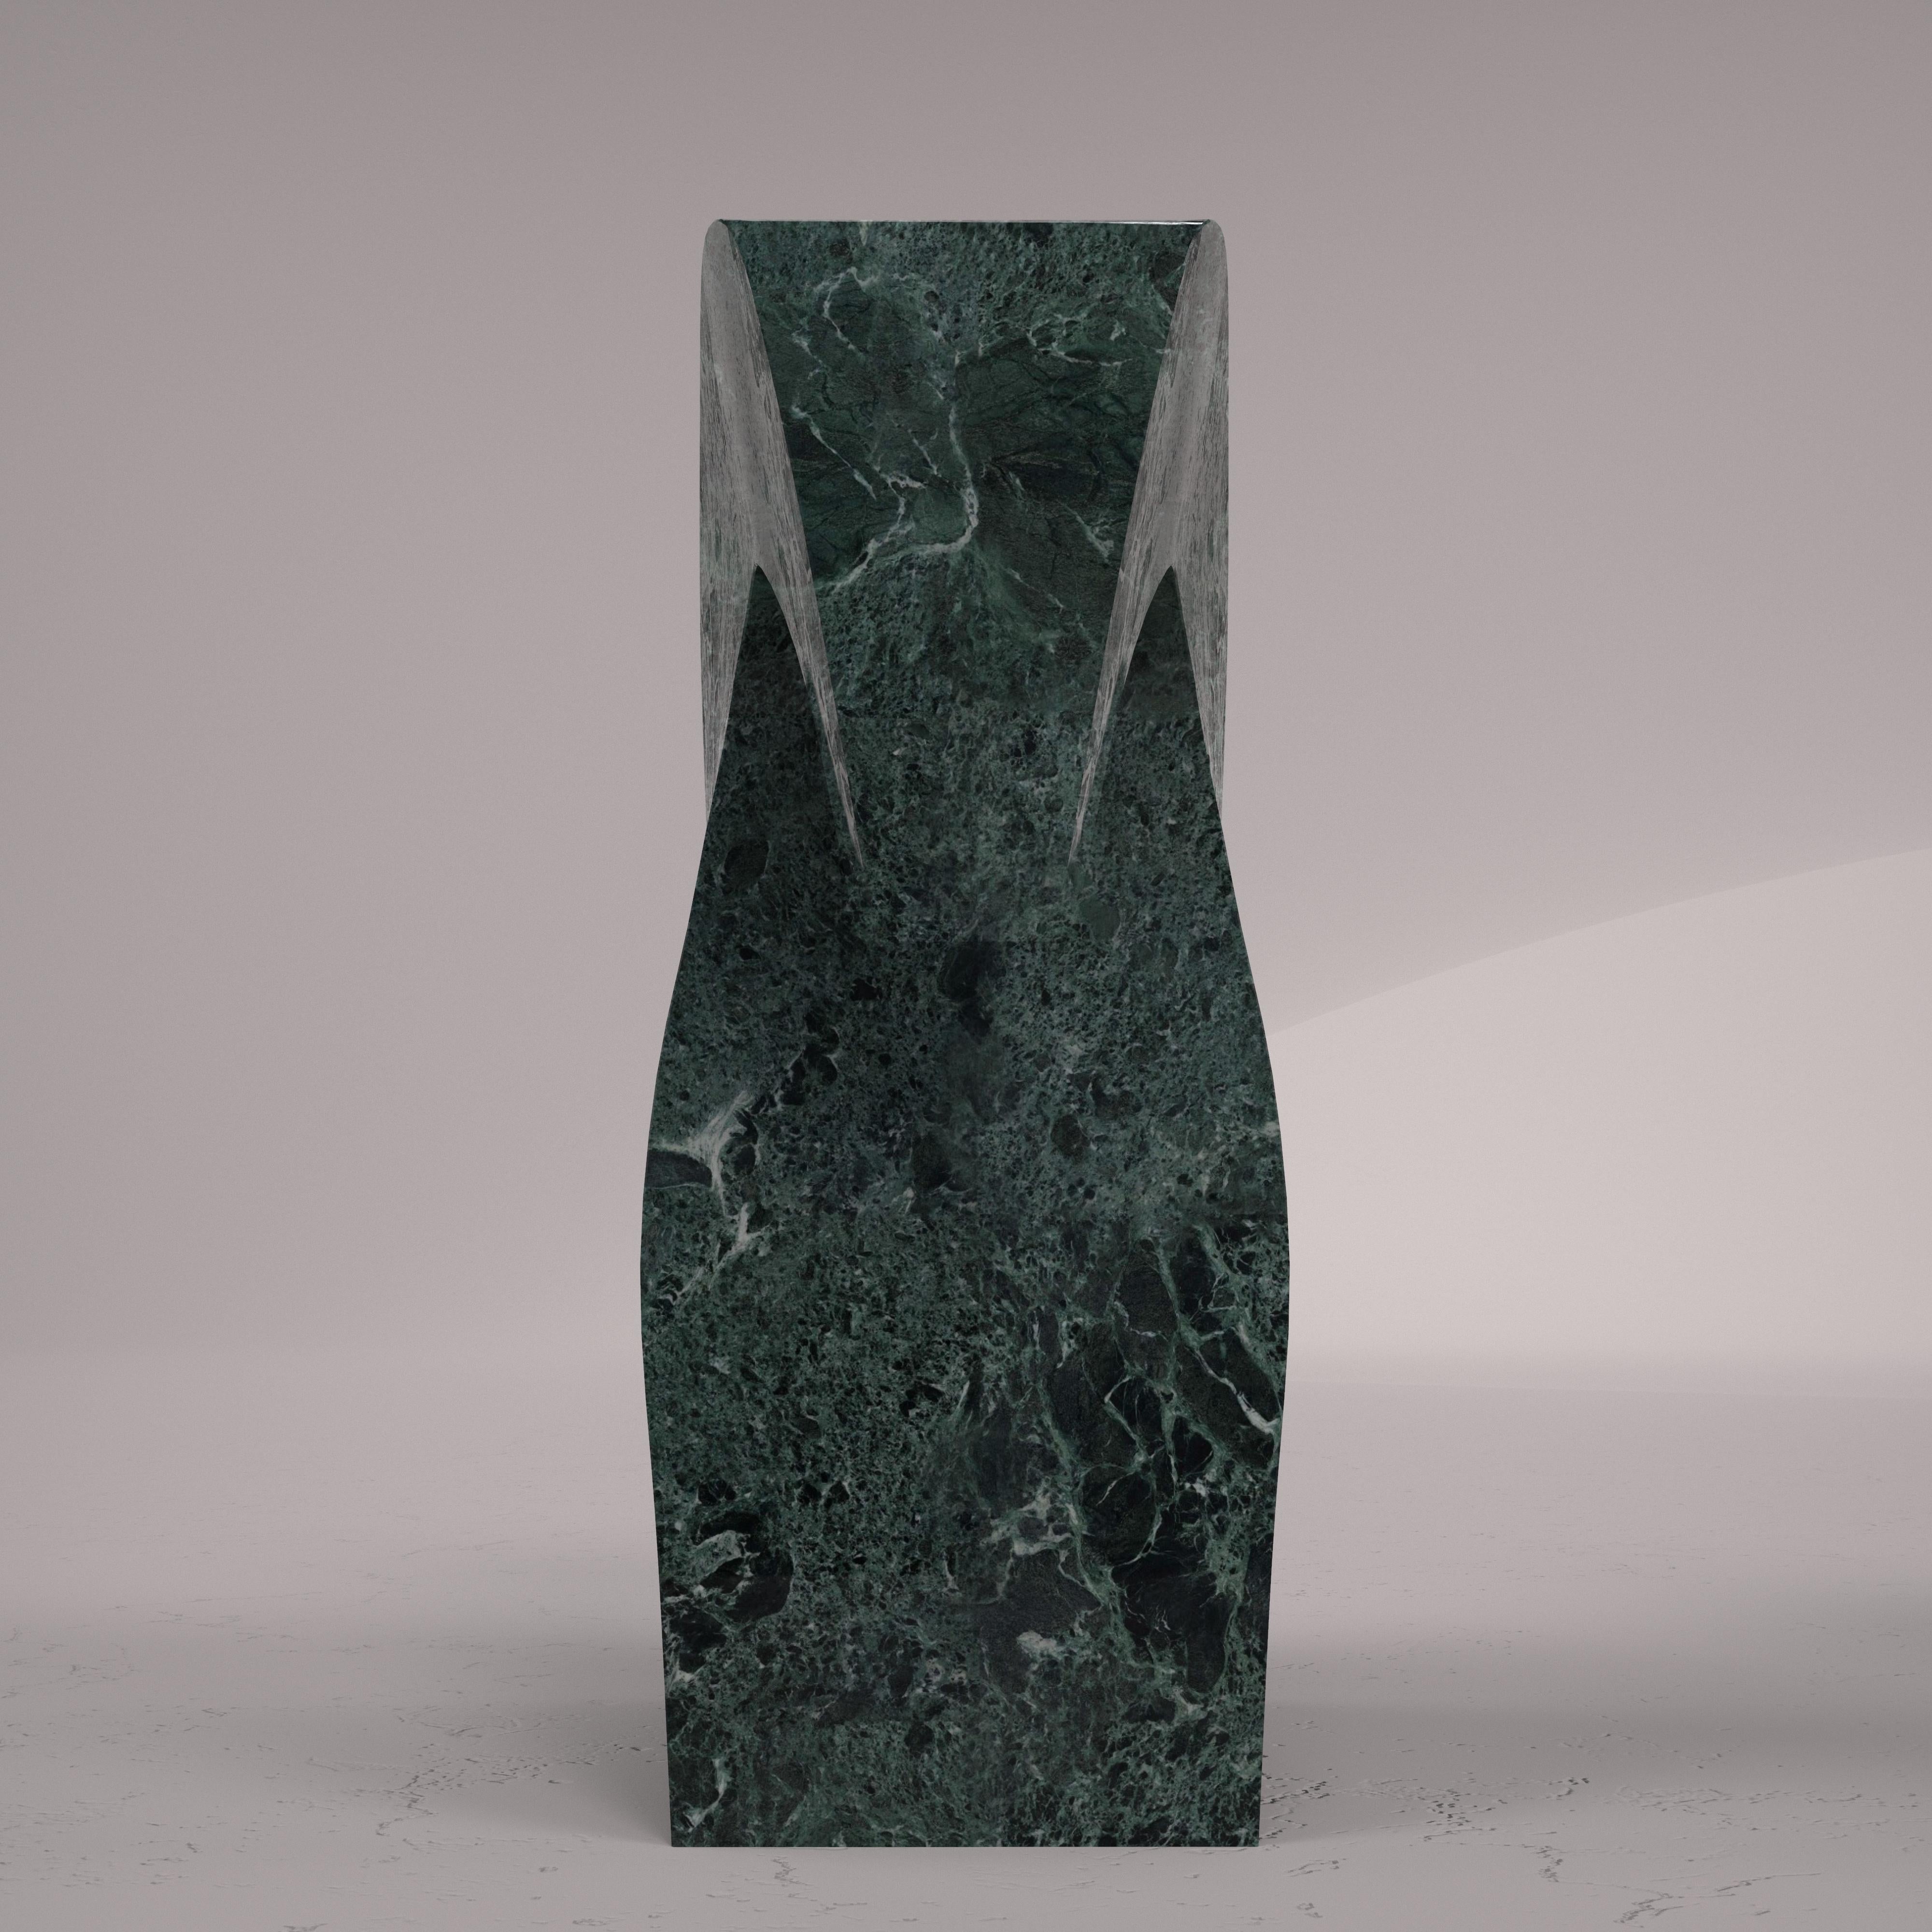 Sandblasted Horse sculpture in Verde Alpi marble by Carcino Design For Sale